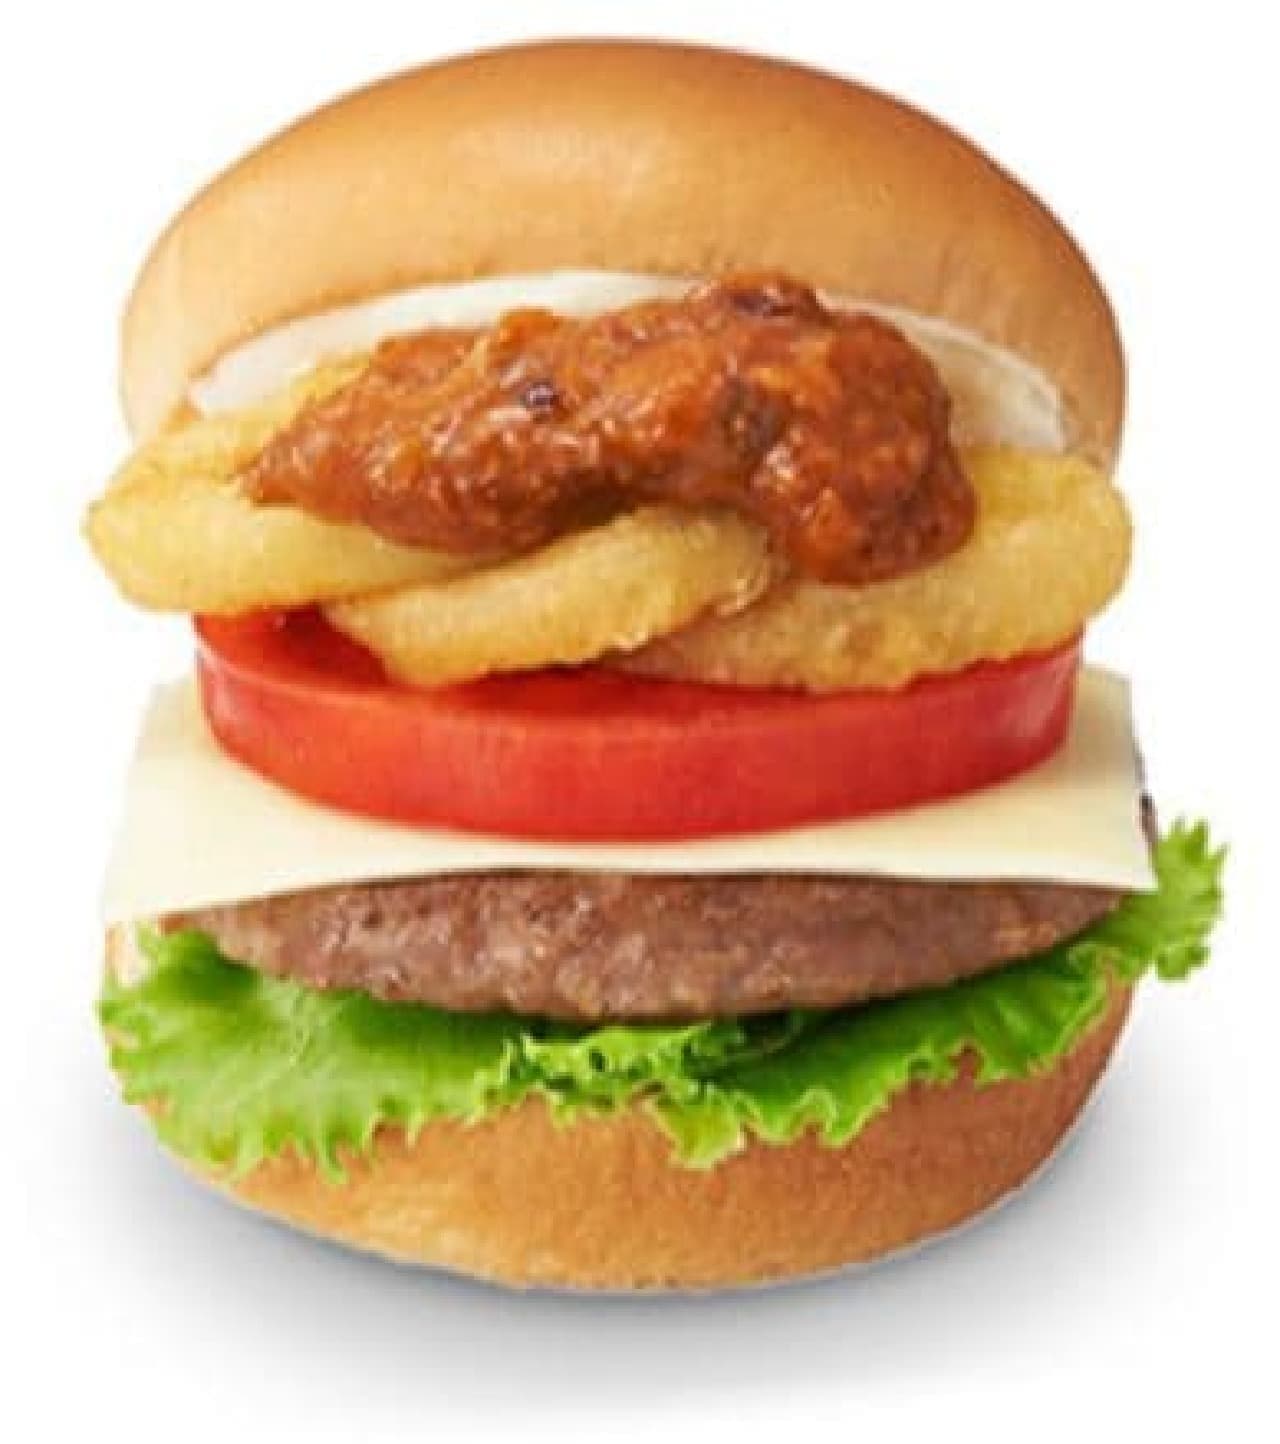 Mos Burger Friday Limited "Gochiso Chili Burger Two Kinds of Cheese"